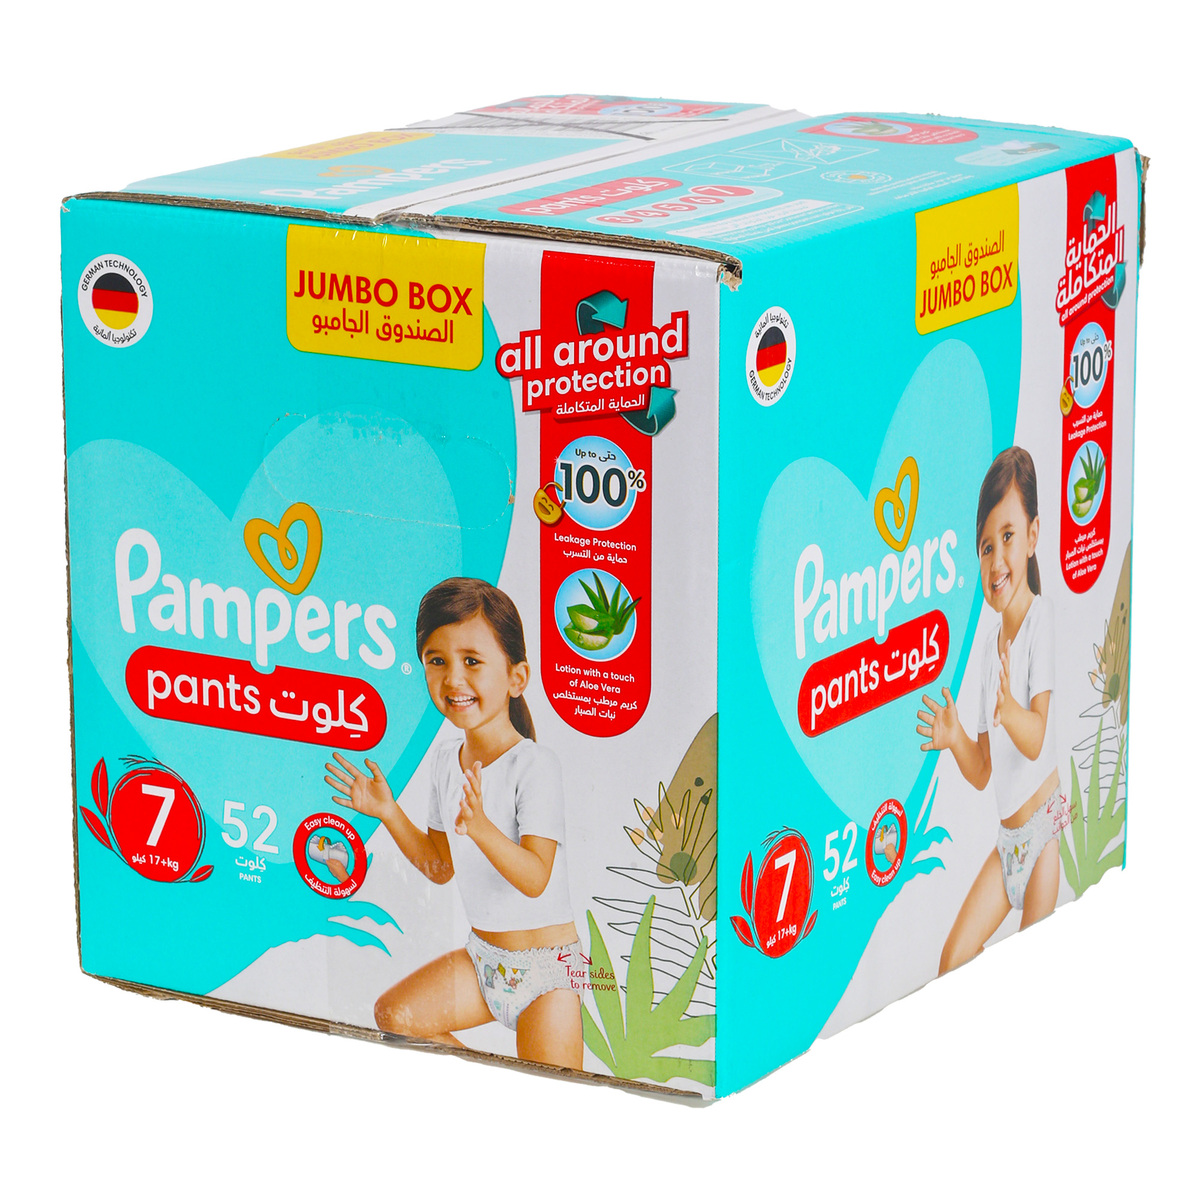 Pampers Baby Diaper Pants Size 7 17+ kg Value Pack 52 pcs